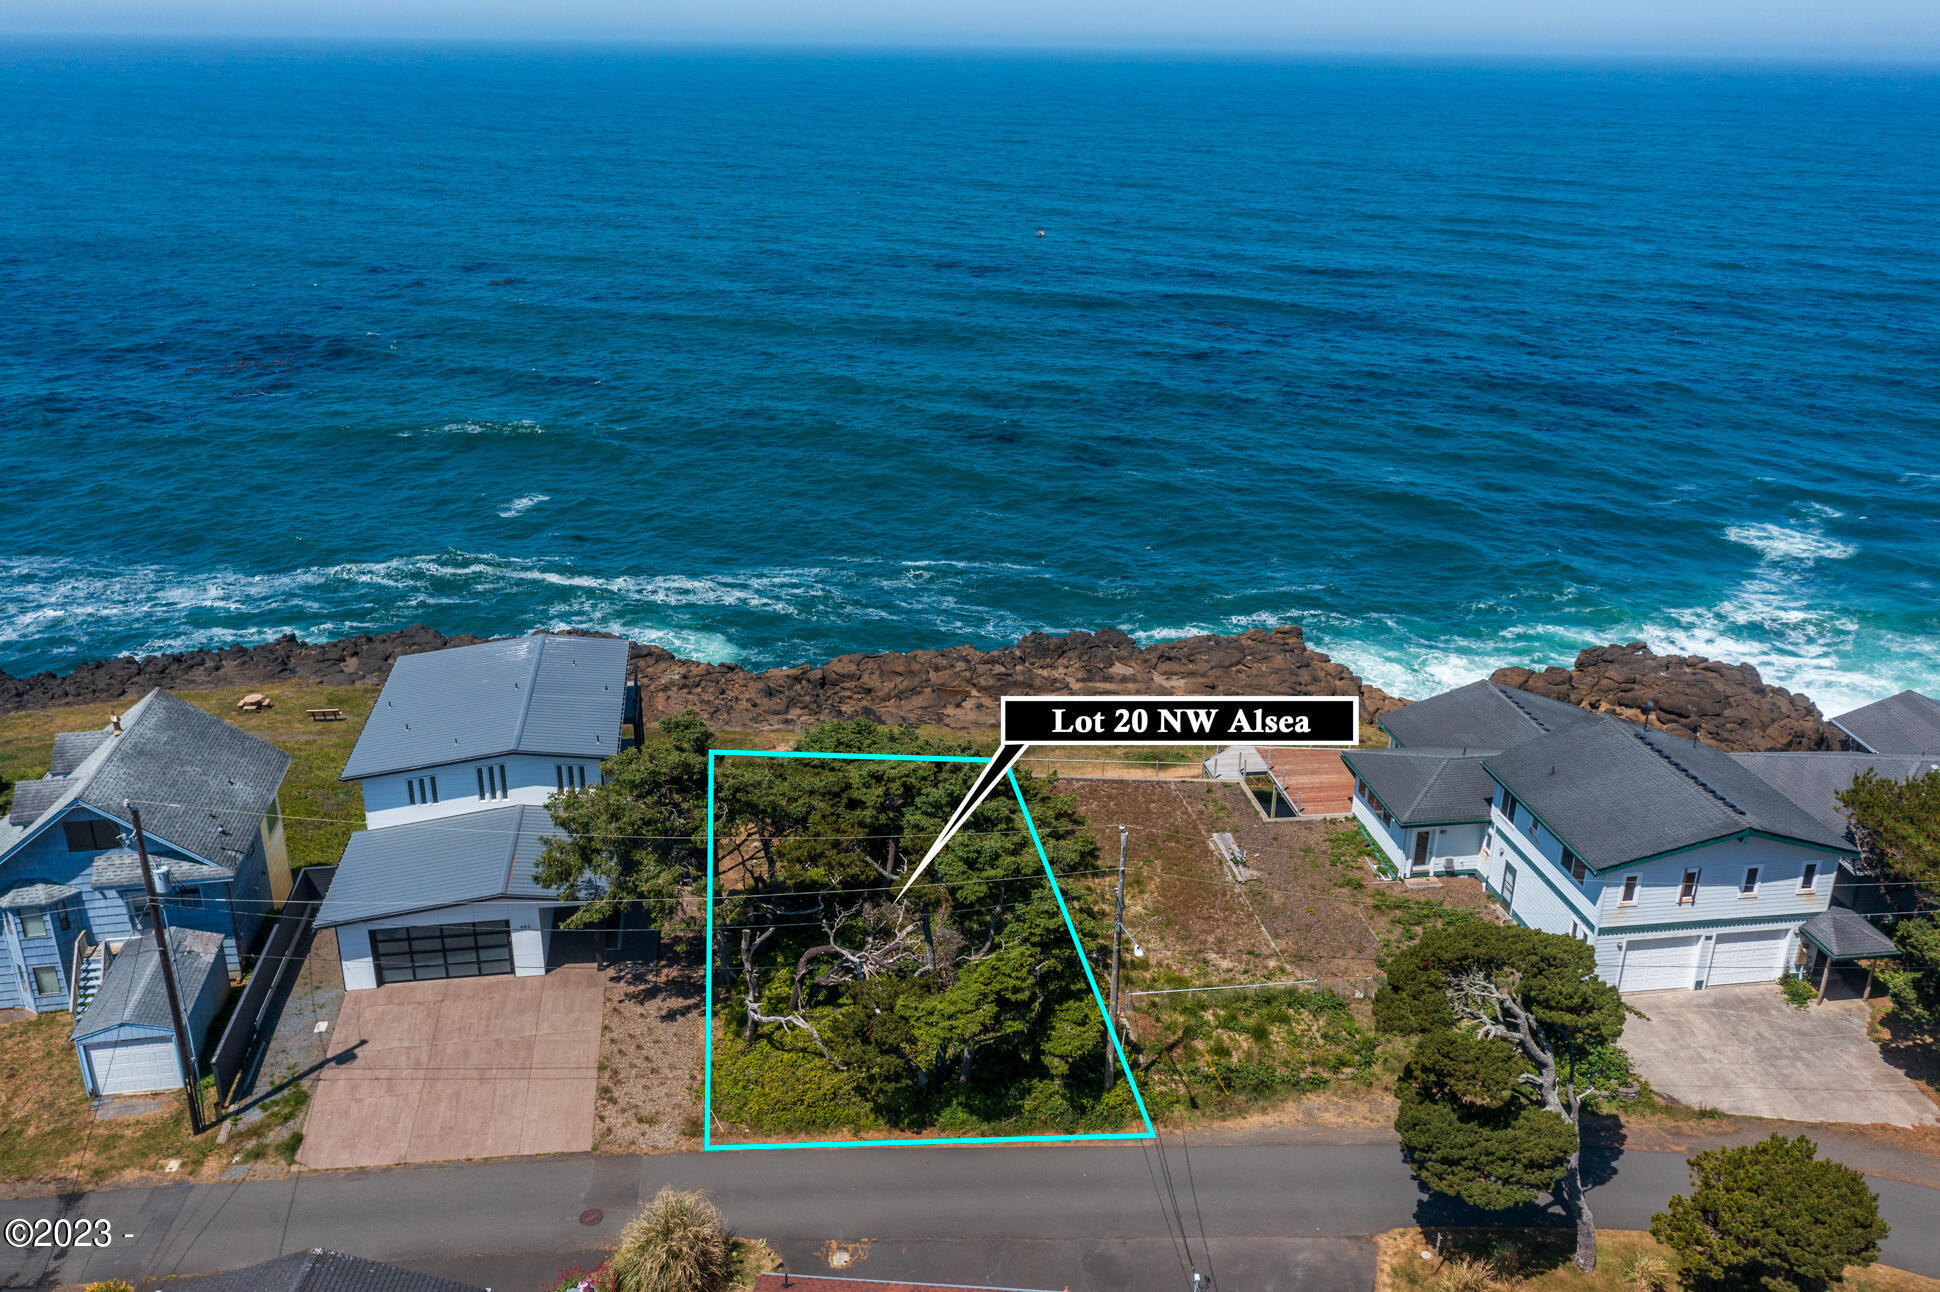 Lot 4 NW Alsea Ave Depoe Bay, Gleneden Beach, Lincoln City, Newport, Otis, Rose Lodge, Seal Rock, Waldport, Yachats, To Home Listings - Amy Plechaty, Emerald Coast Realty Real Estate, homes for sale, property for sale